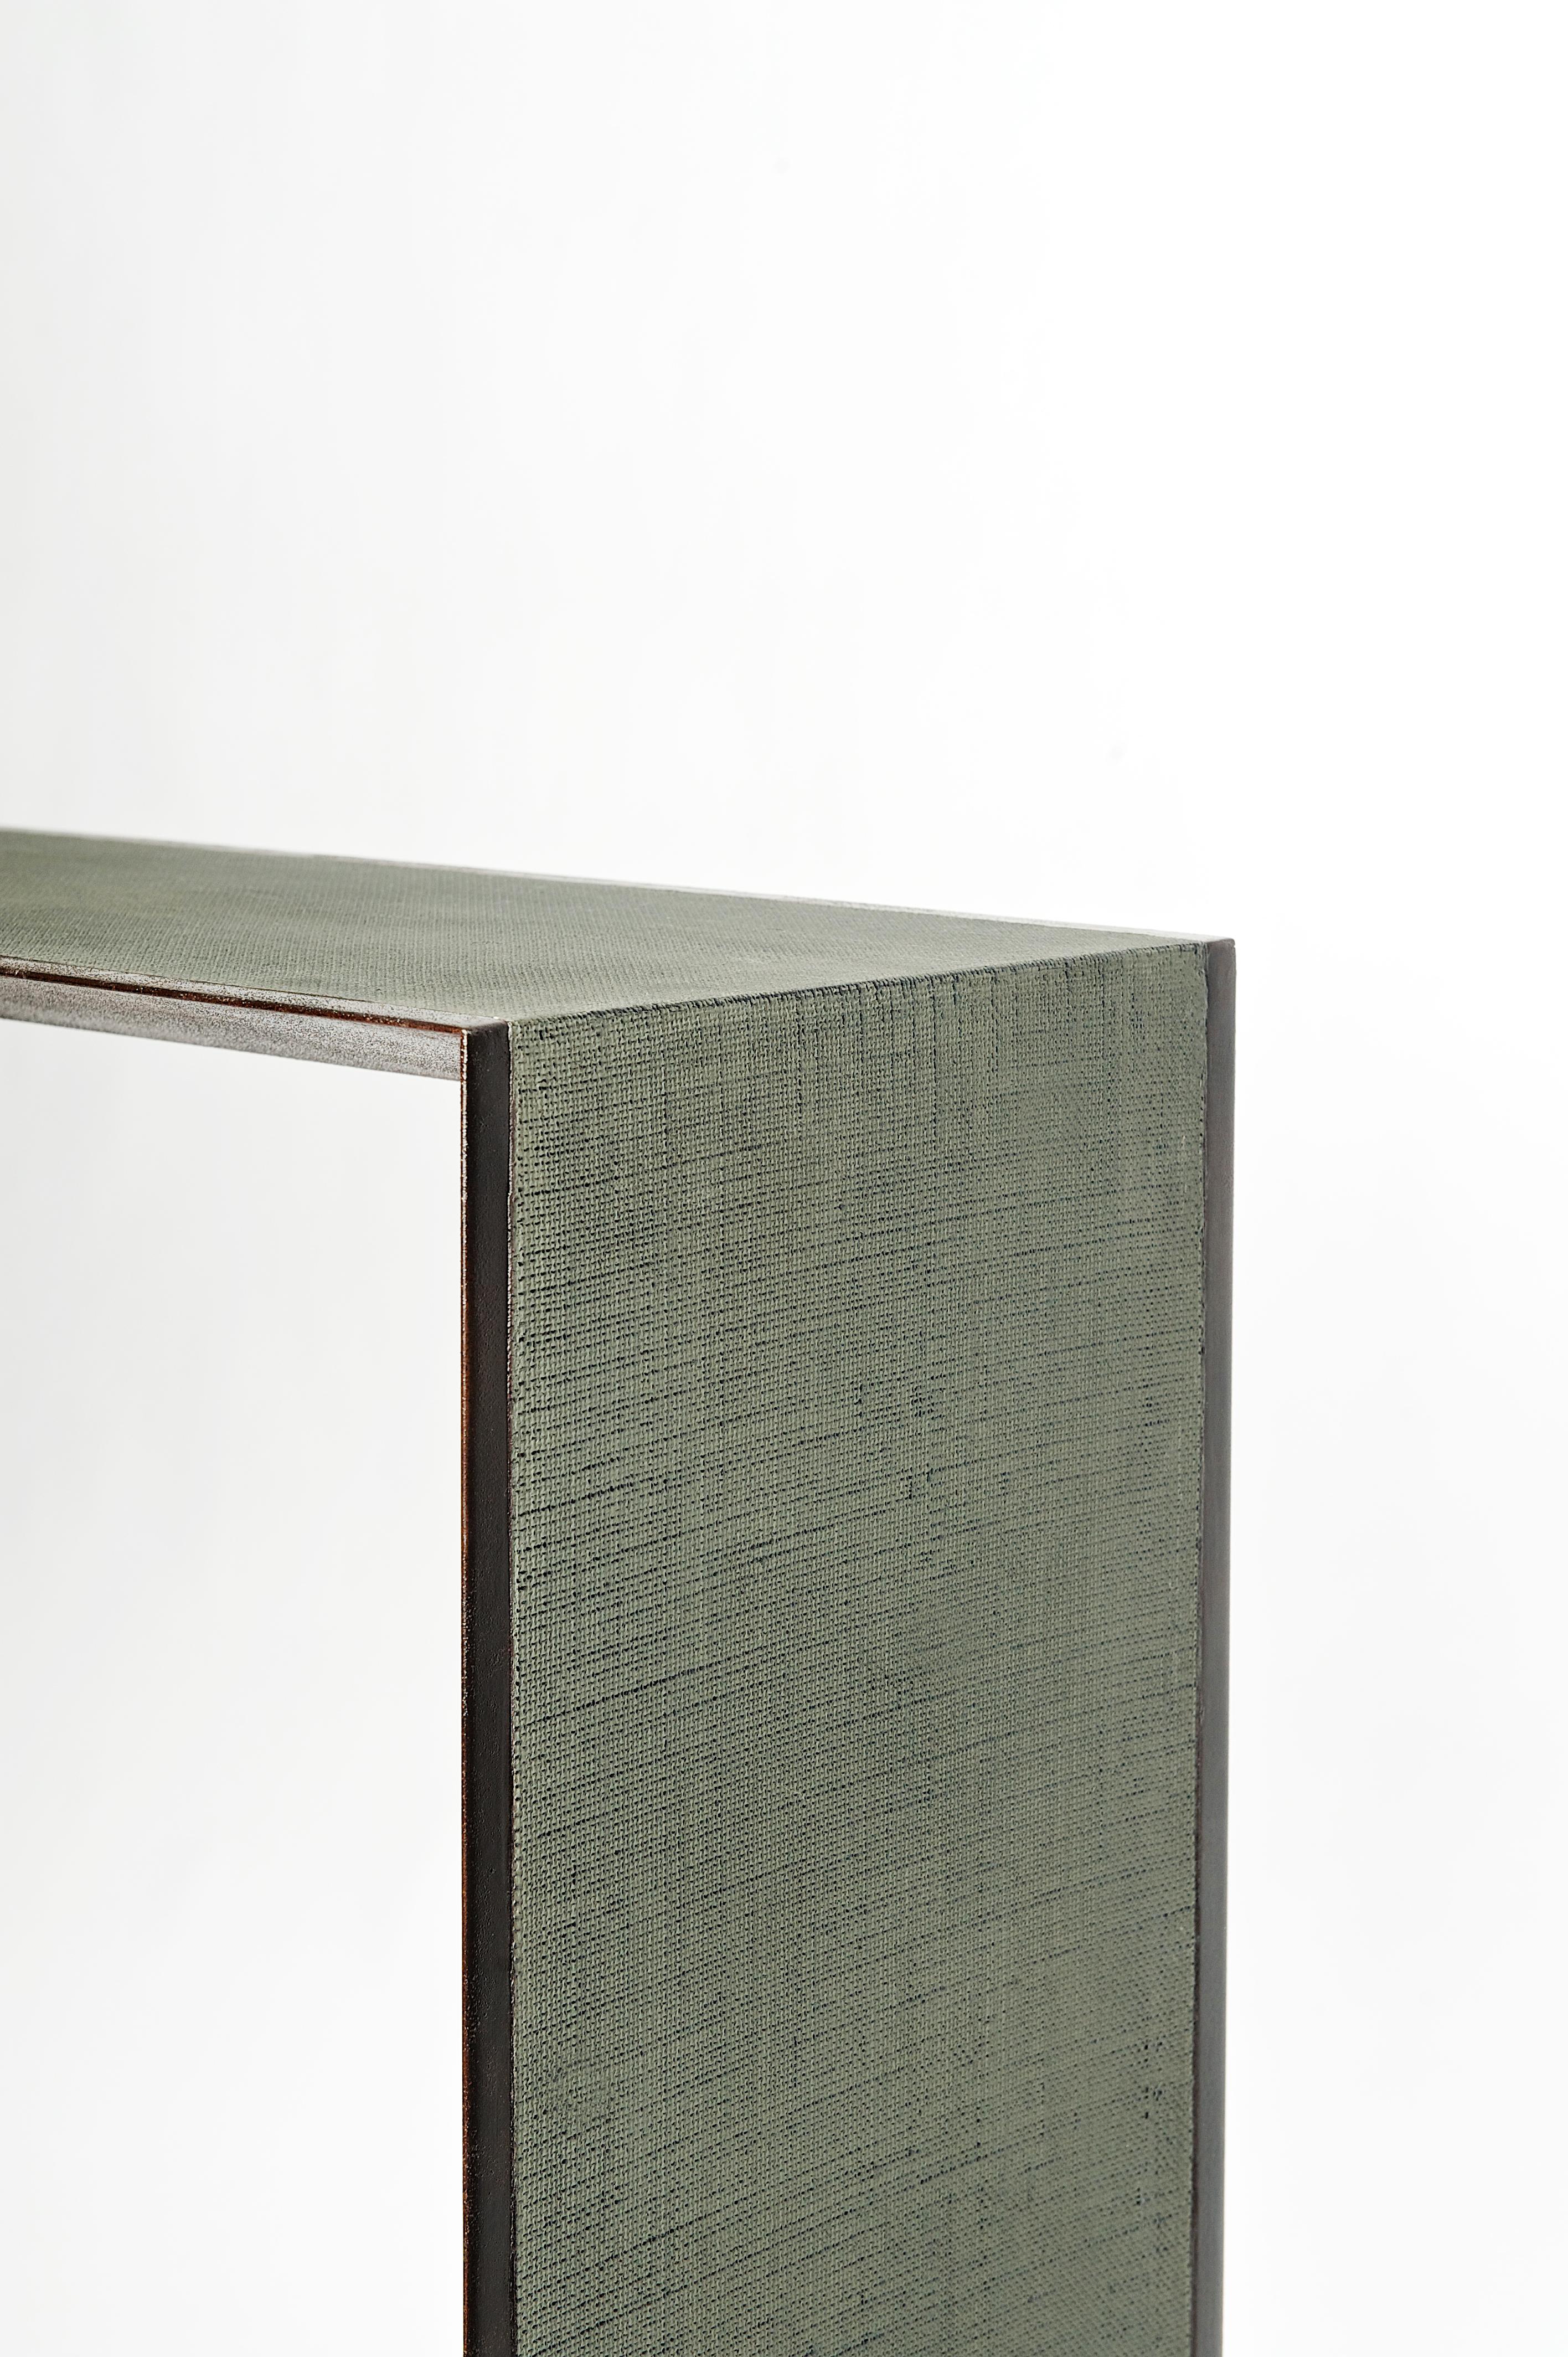 Modern Industrial Wing Console in Steel and Textural Linen by Elan Atelier (Preorder) For Sale